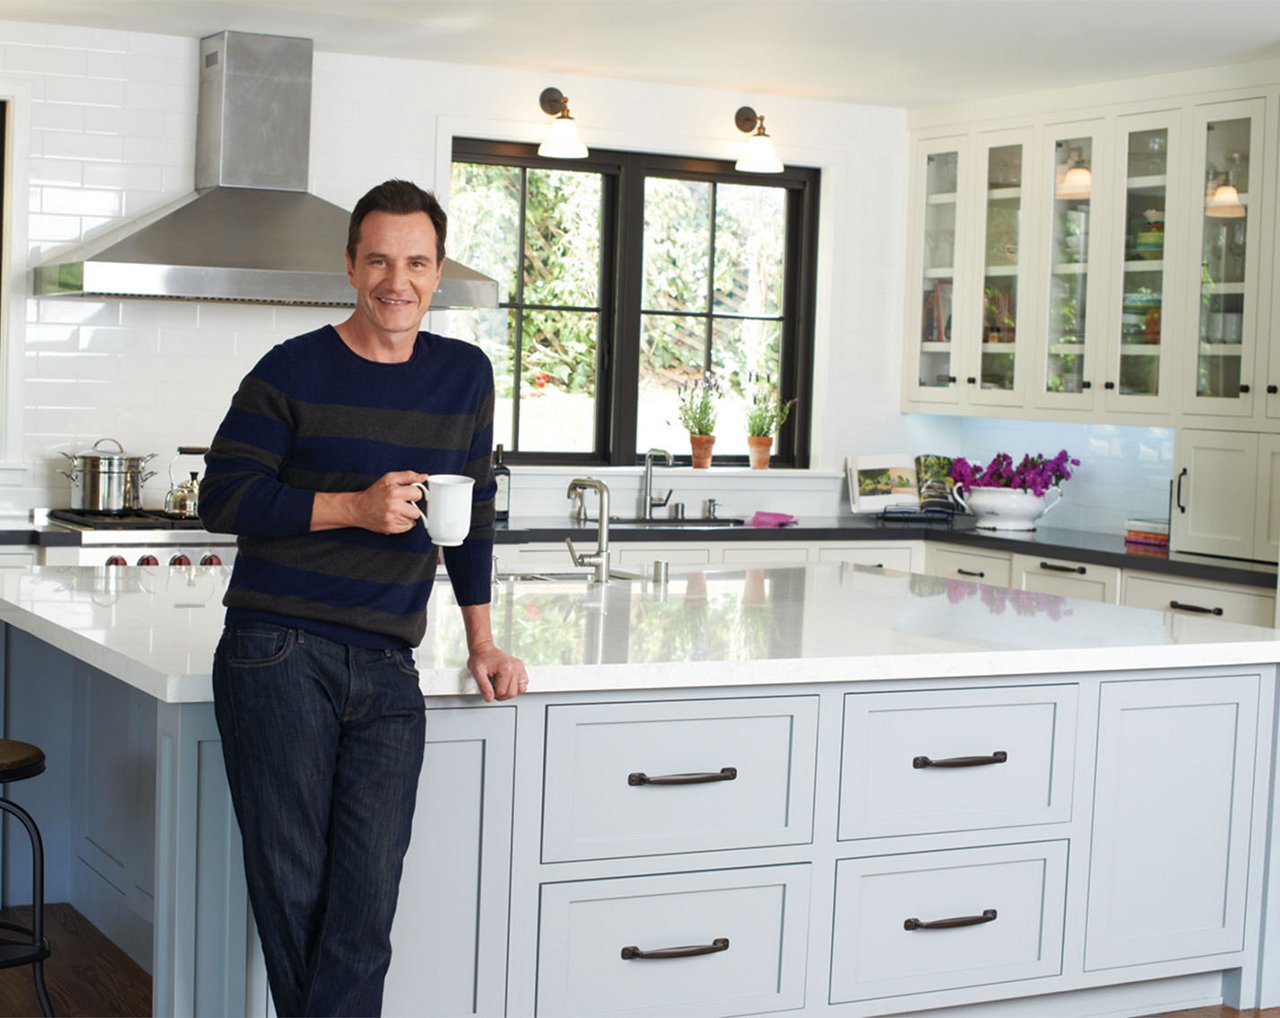 Tim DeKay posing in front of his kitchen featuring Cambria quartz countertops.